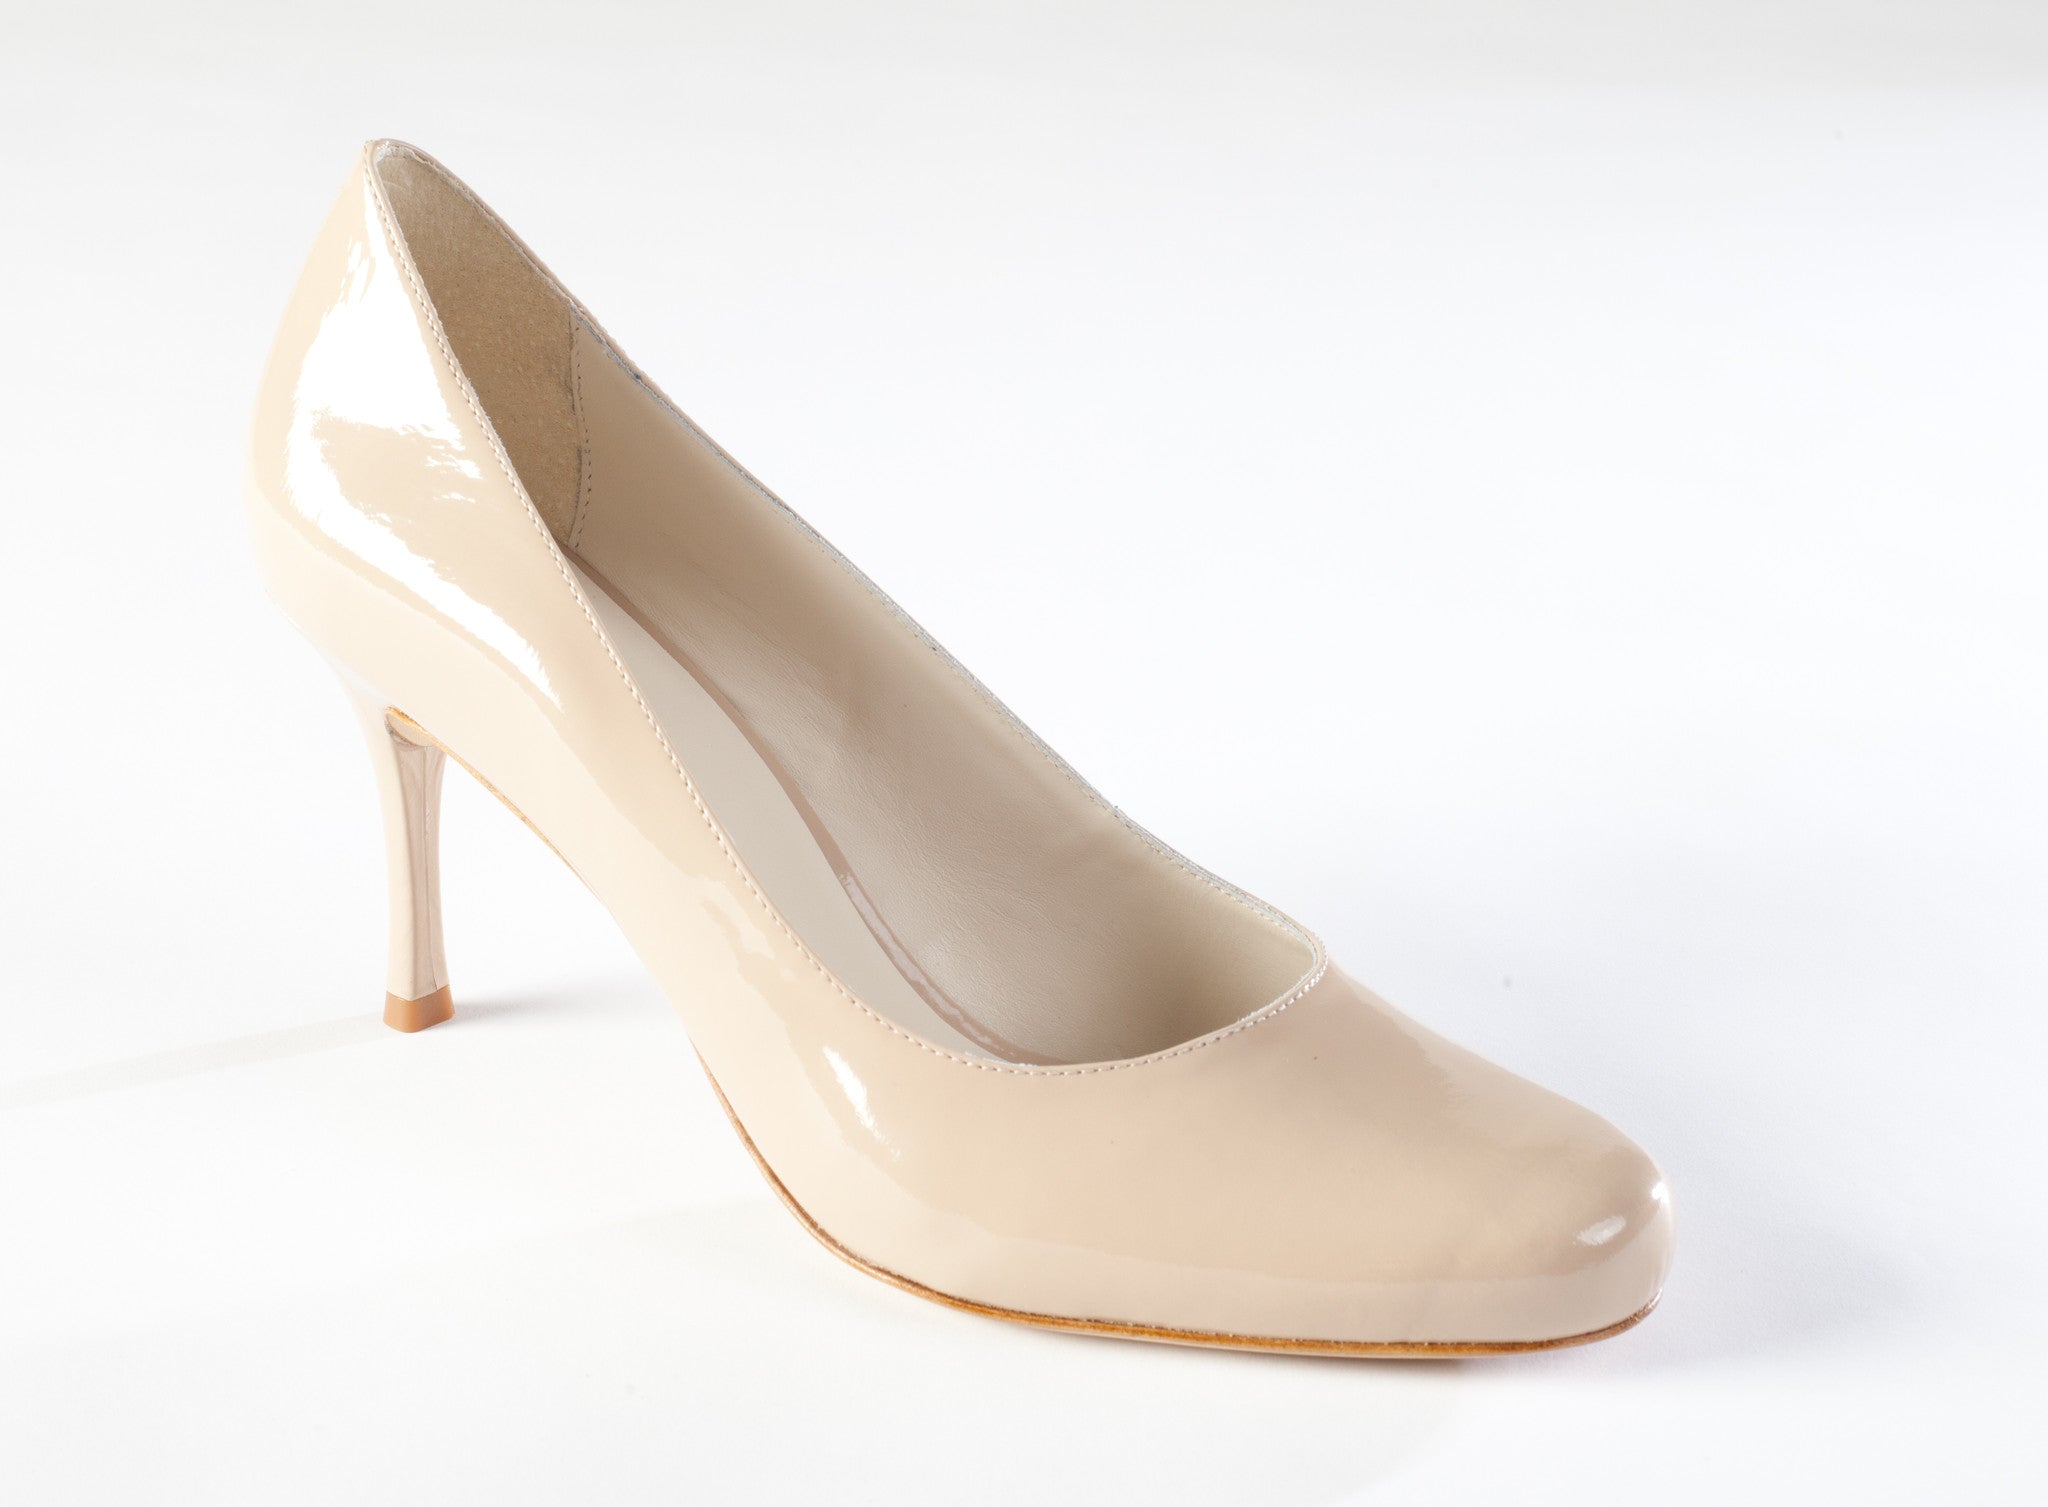 Andre steder Billy ged skak Large Size Nude Patent Leather 3 inch heel Pump – Zofie Shoes